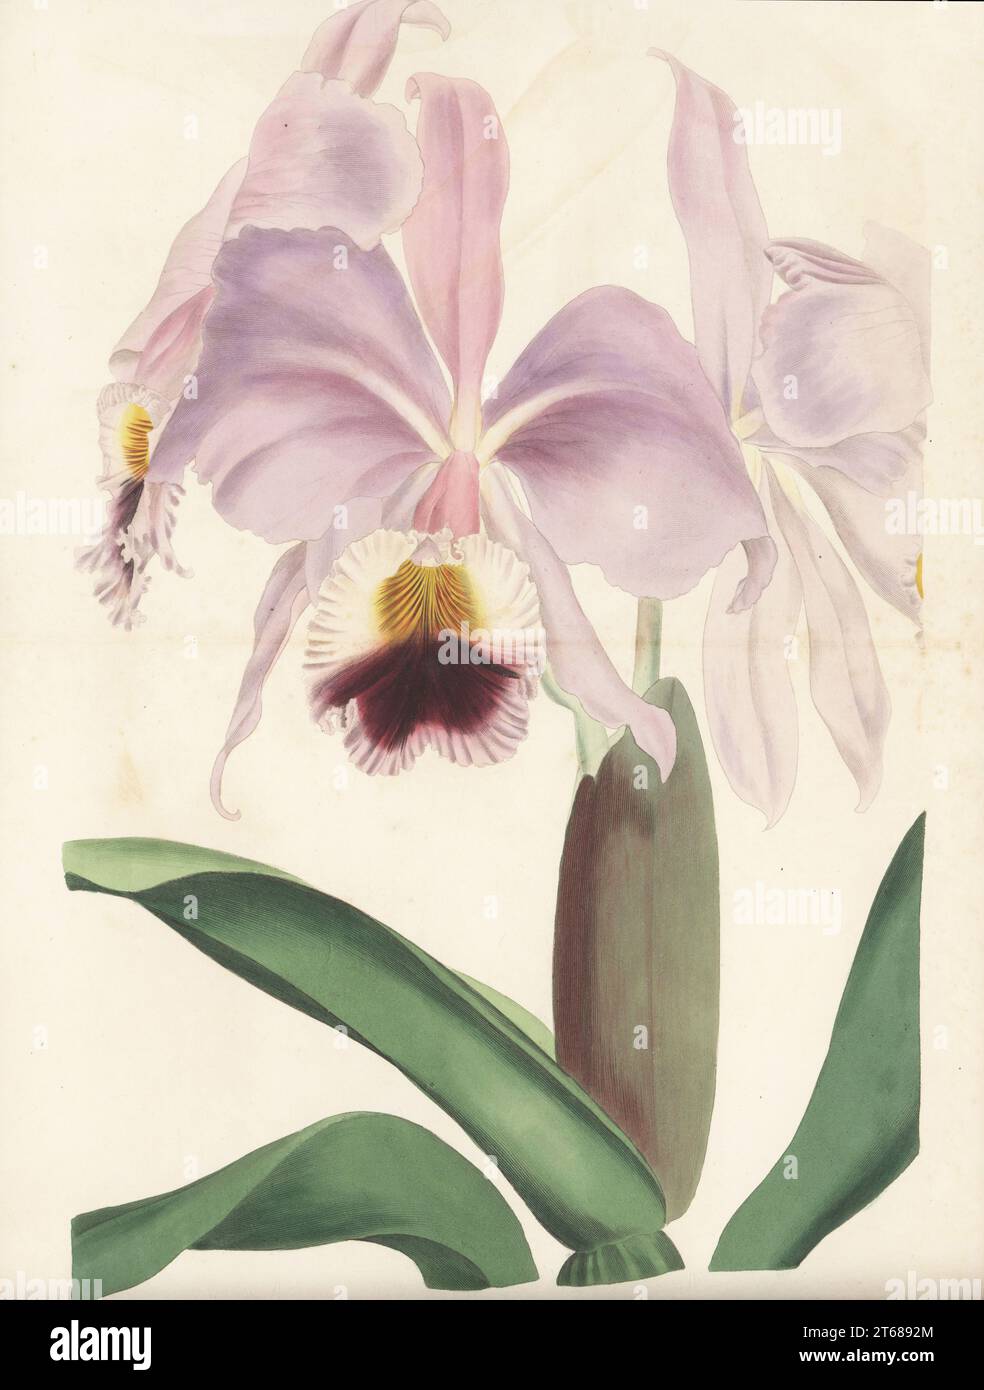 Crimson cattleya, ruby-lipped cattleya or crimson-lipped cattleya orchid, Cattleya labiata. Imported from Brazil by English ornithologist and artist William Swainson in 1818. Handcoloured engraving after a botanical illustration by Samuel Holden from Joseph Paxtons Magazine of Botany, and Register of Flowering Plants, Volume 4, Orr and Smith, London, 1837. Stock Photo